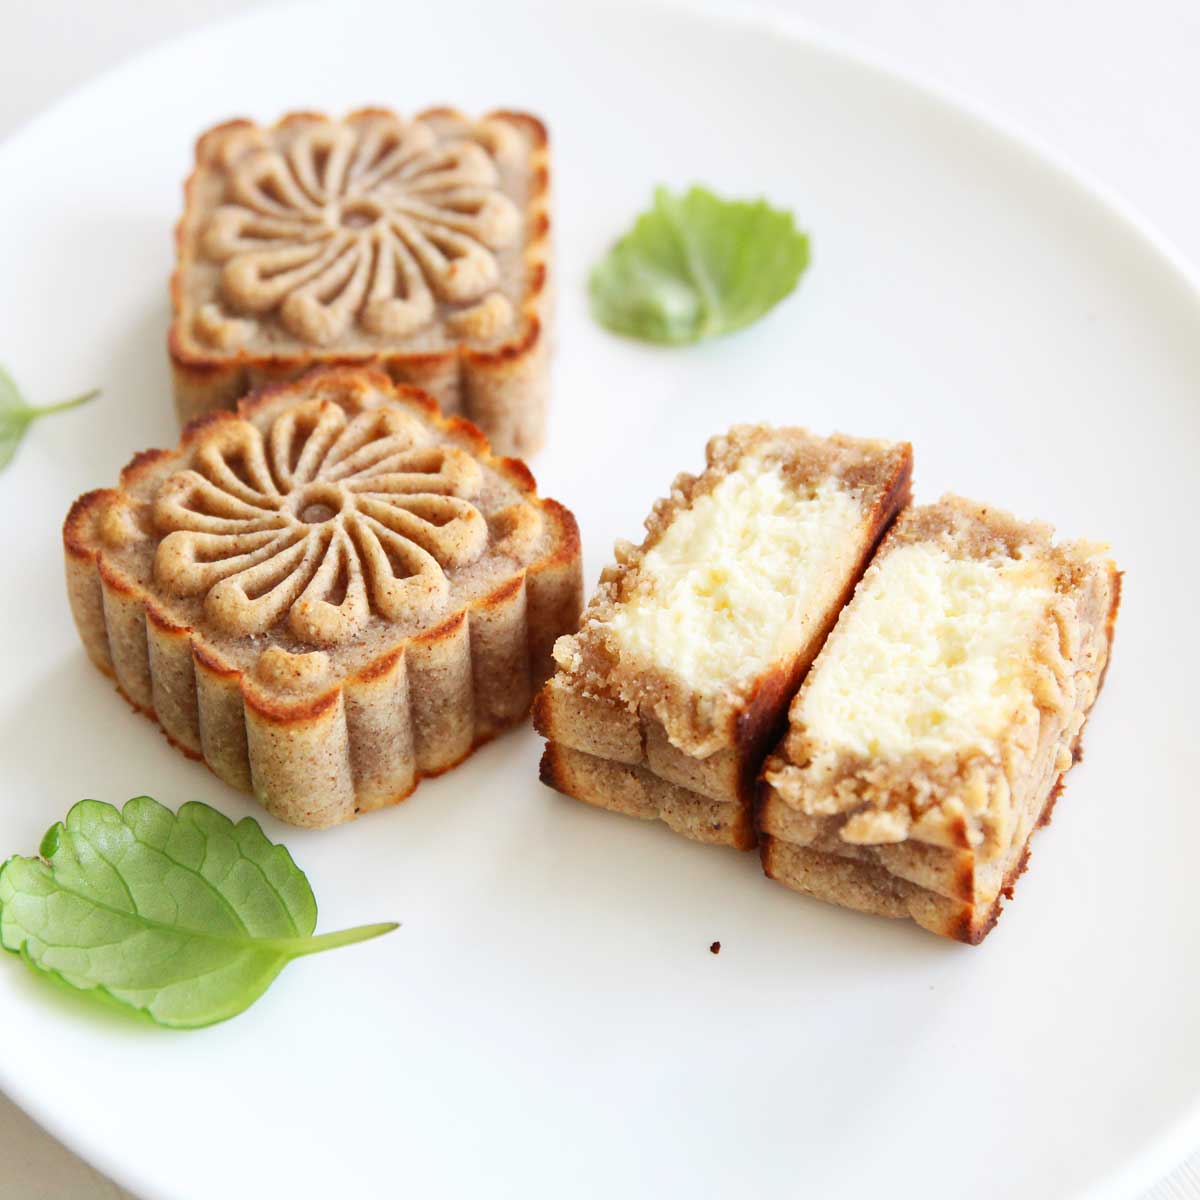 Baked Almond Flour Mooncakes with Easy Cheesecake Filling - Nutella Stuffed Banana